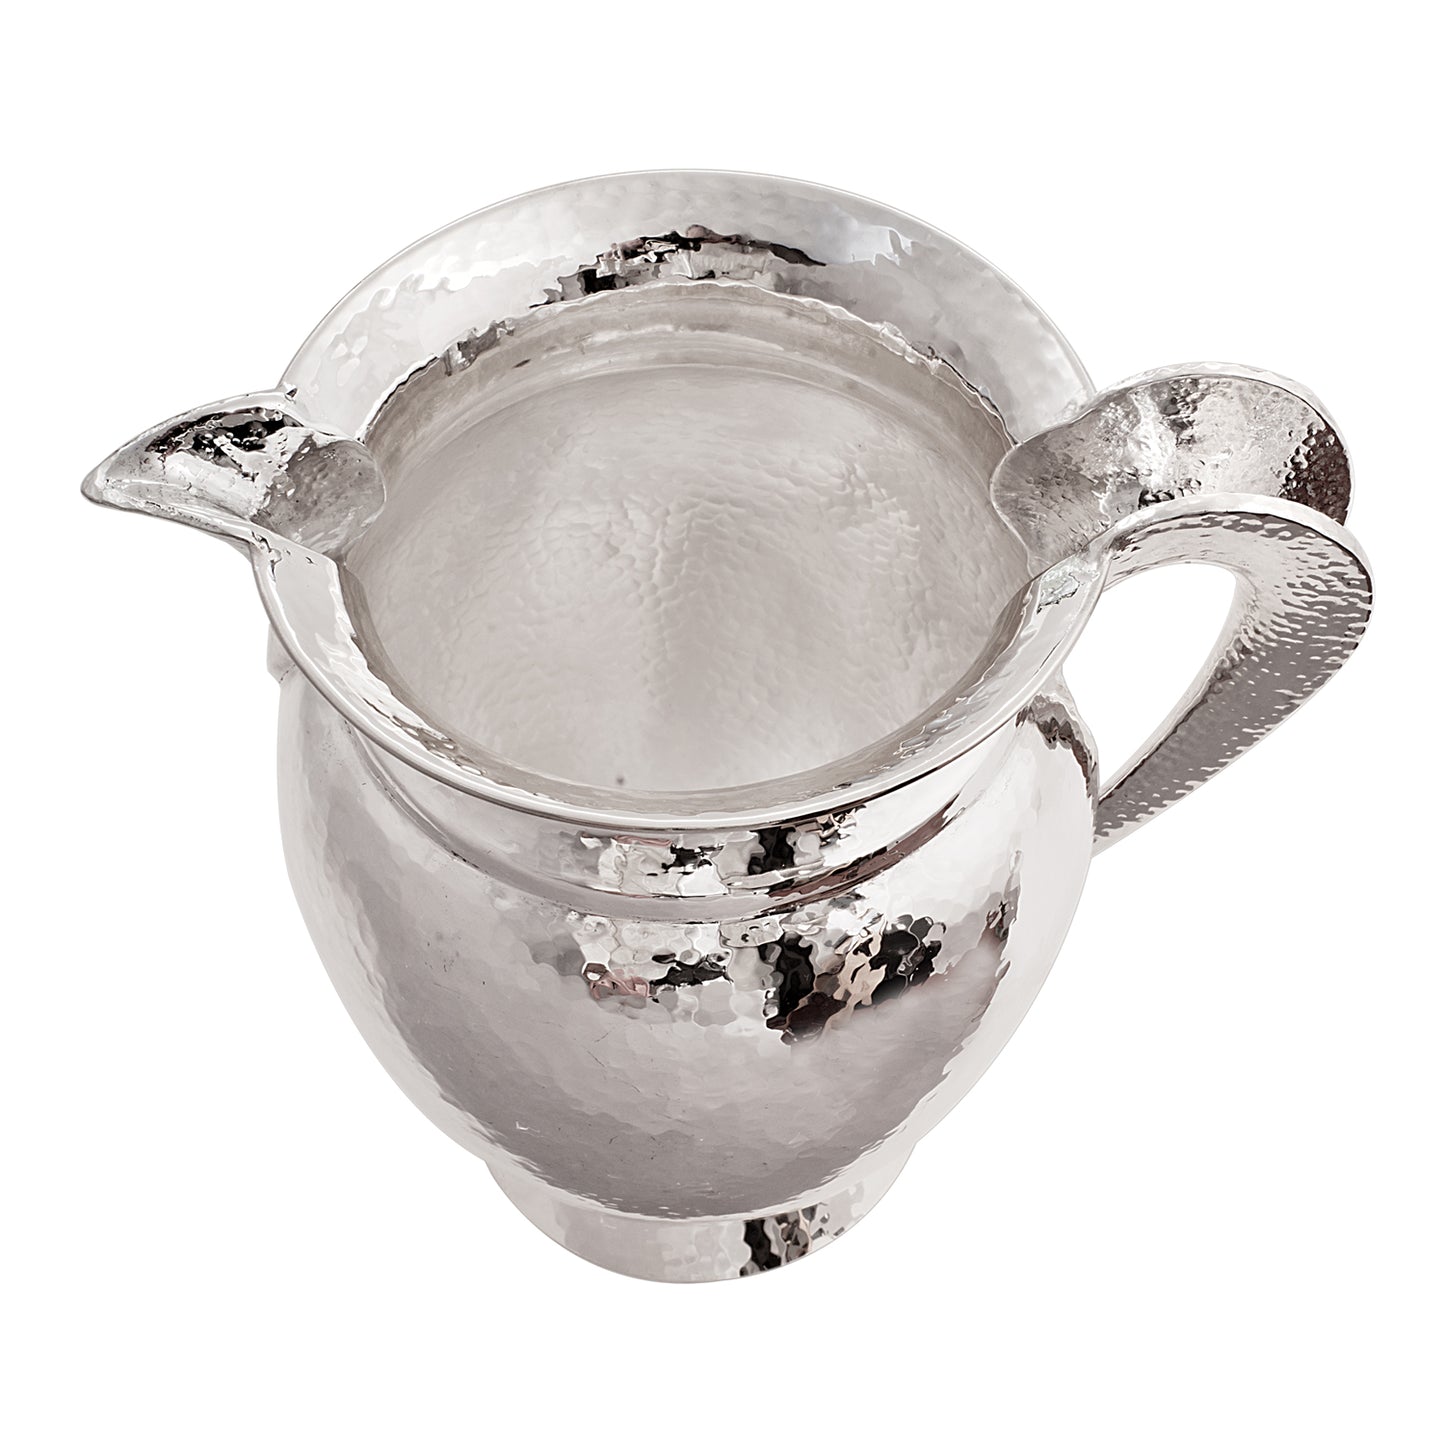 TROIA STERLING SILVER - PITCHER